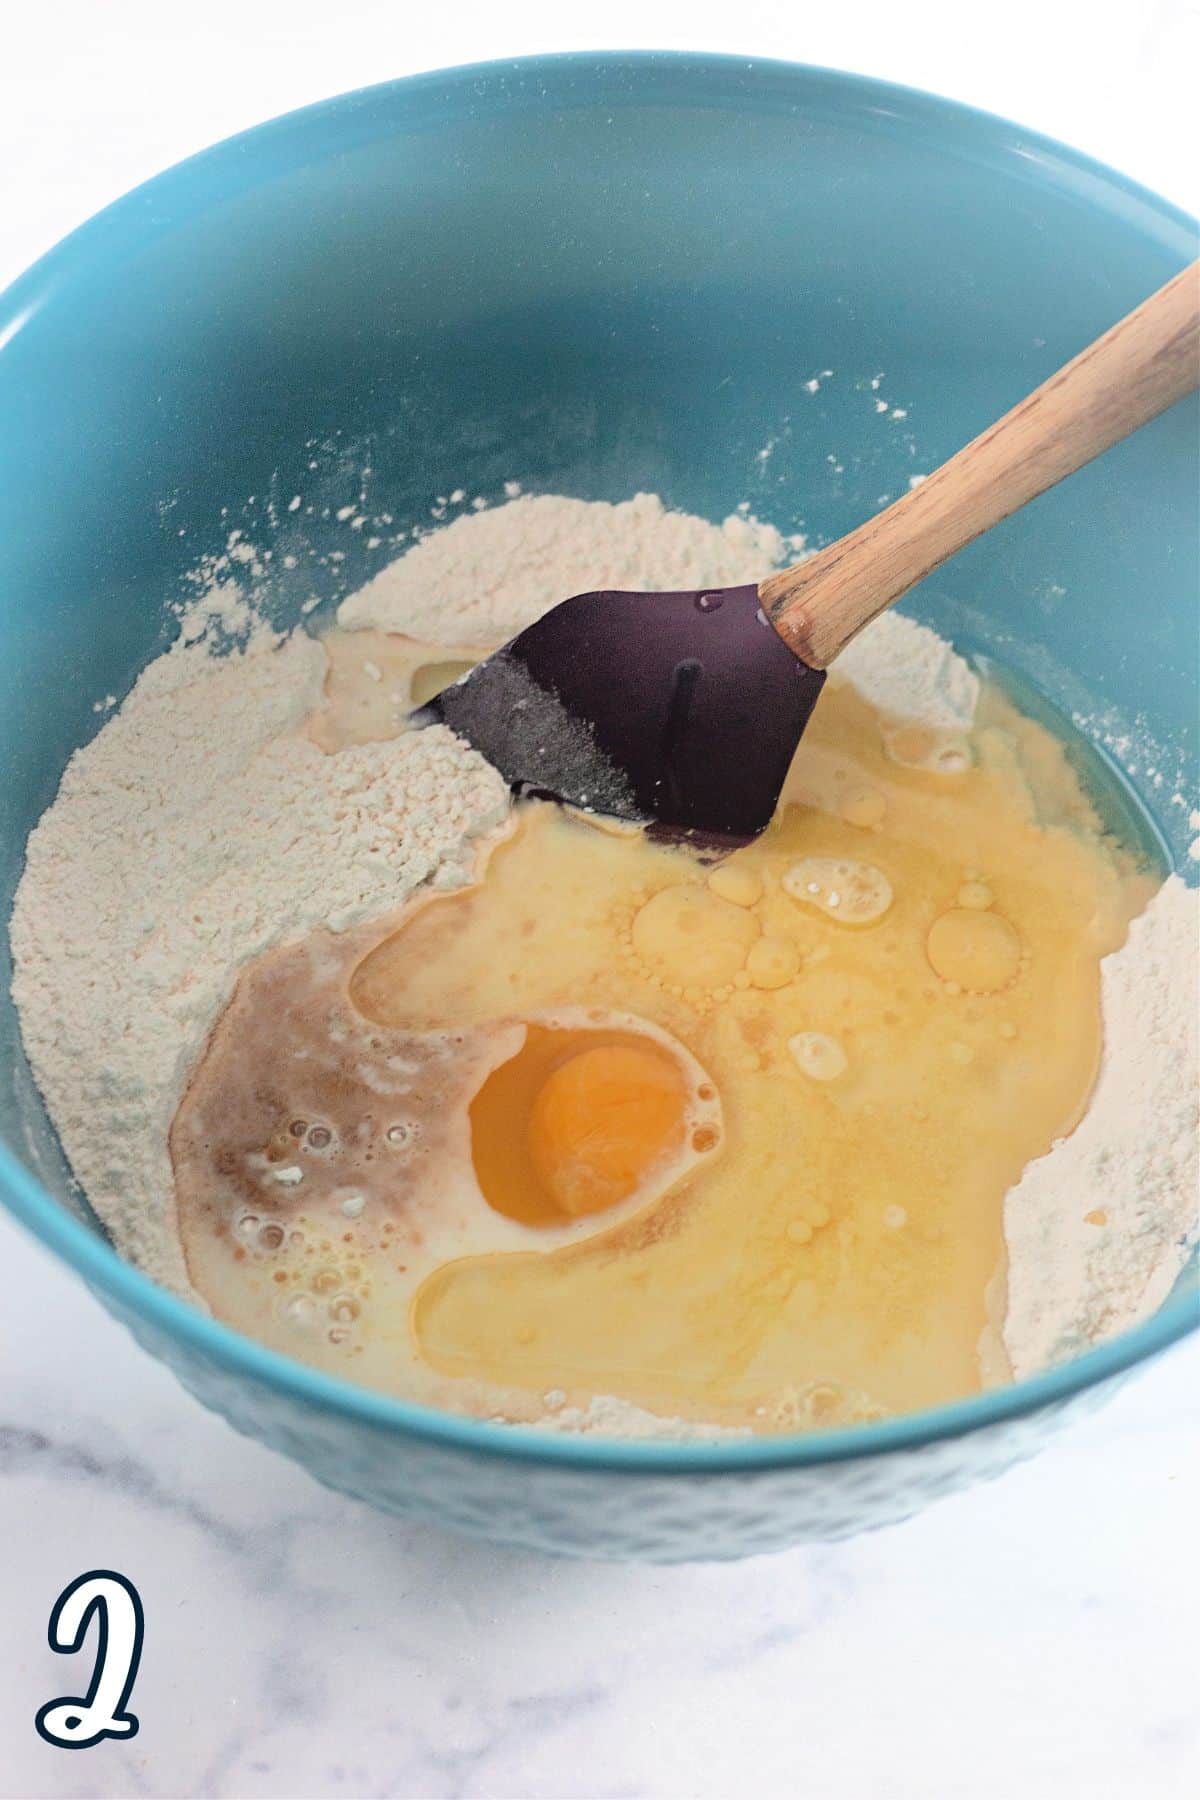 Egg, milk, juice, and other wet ingredients added to flour in a mixing bowl. 